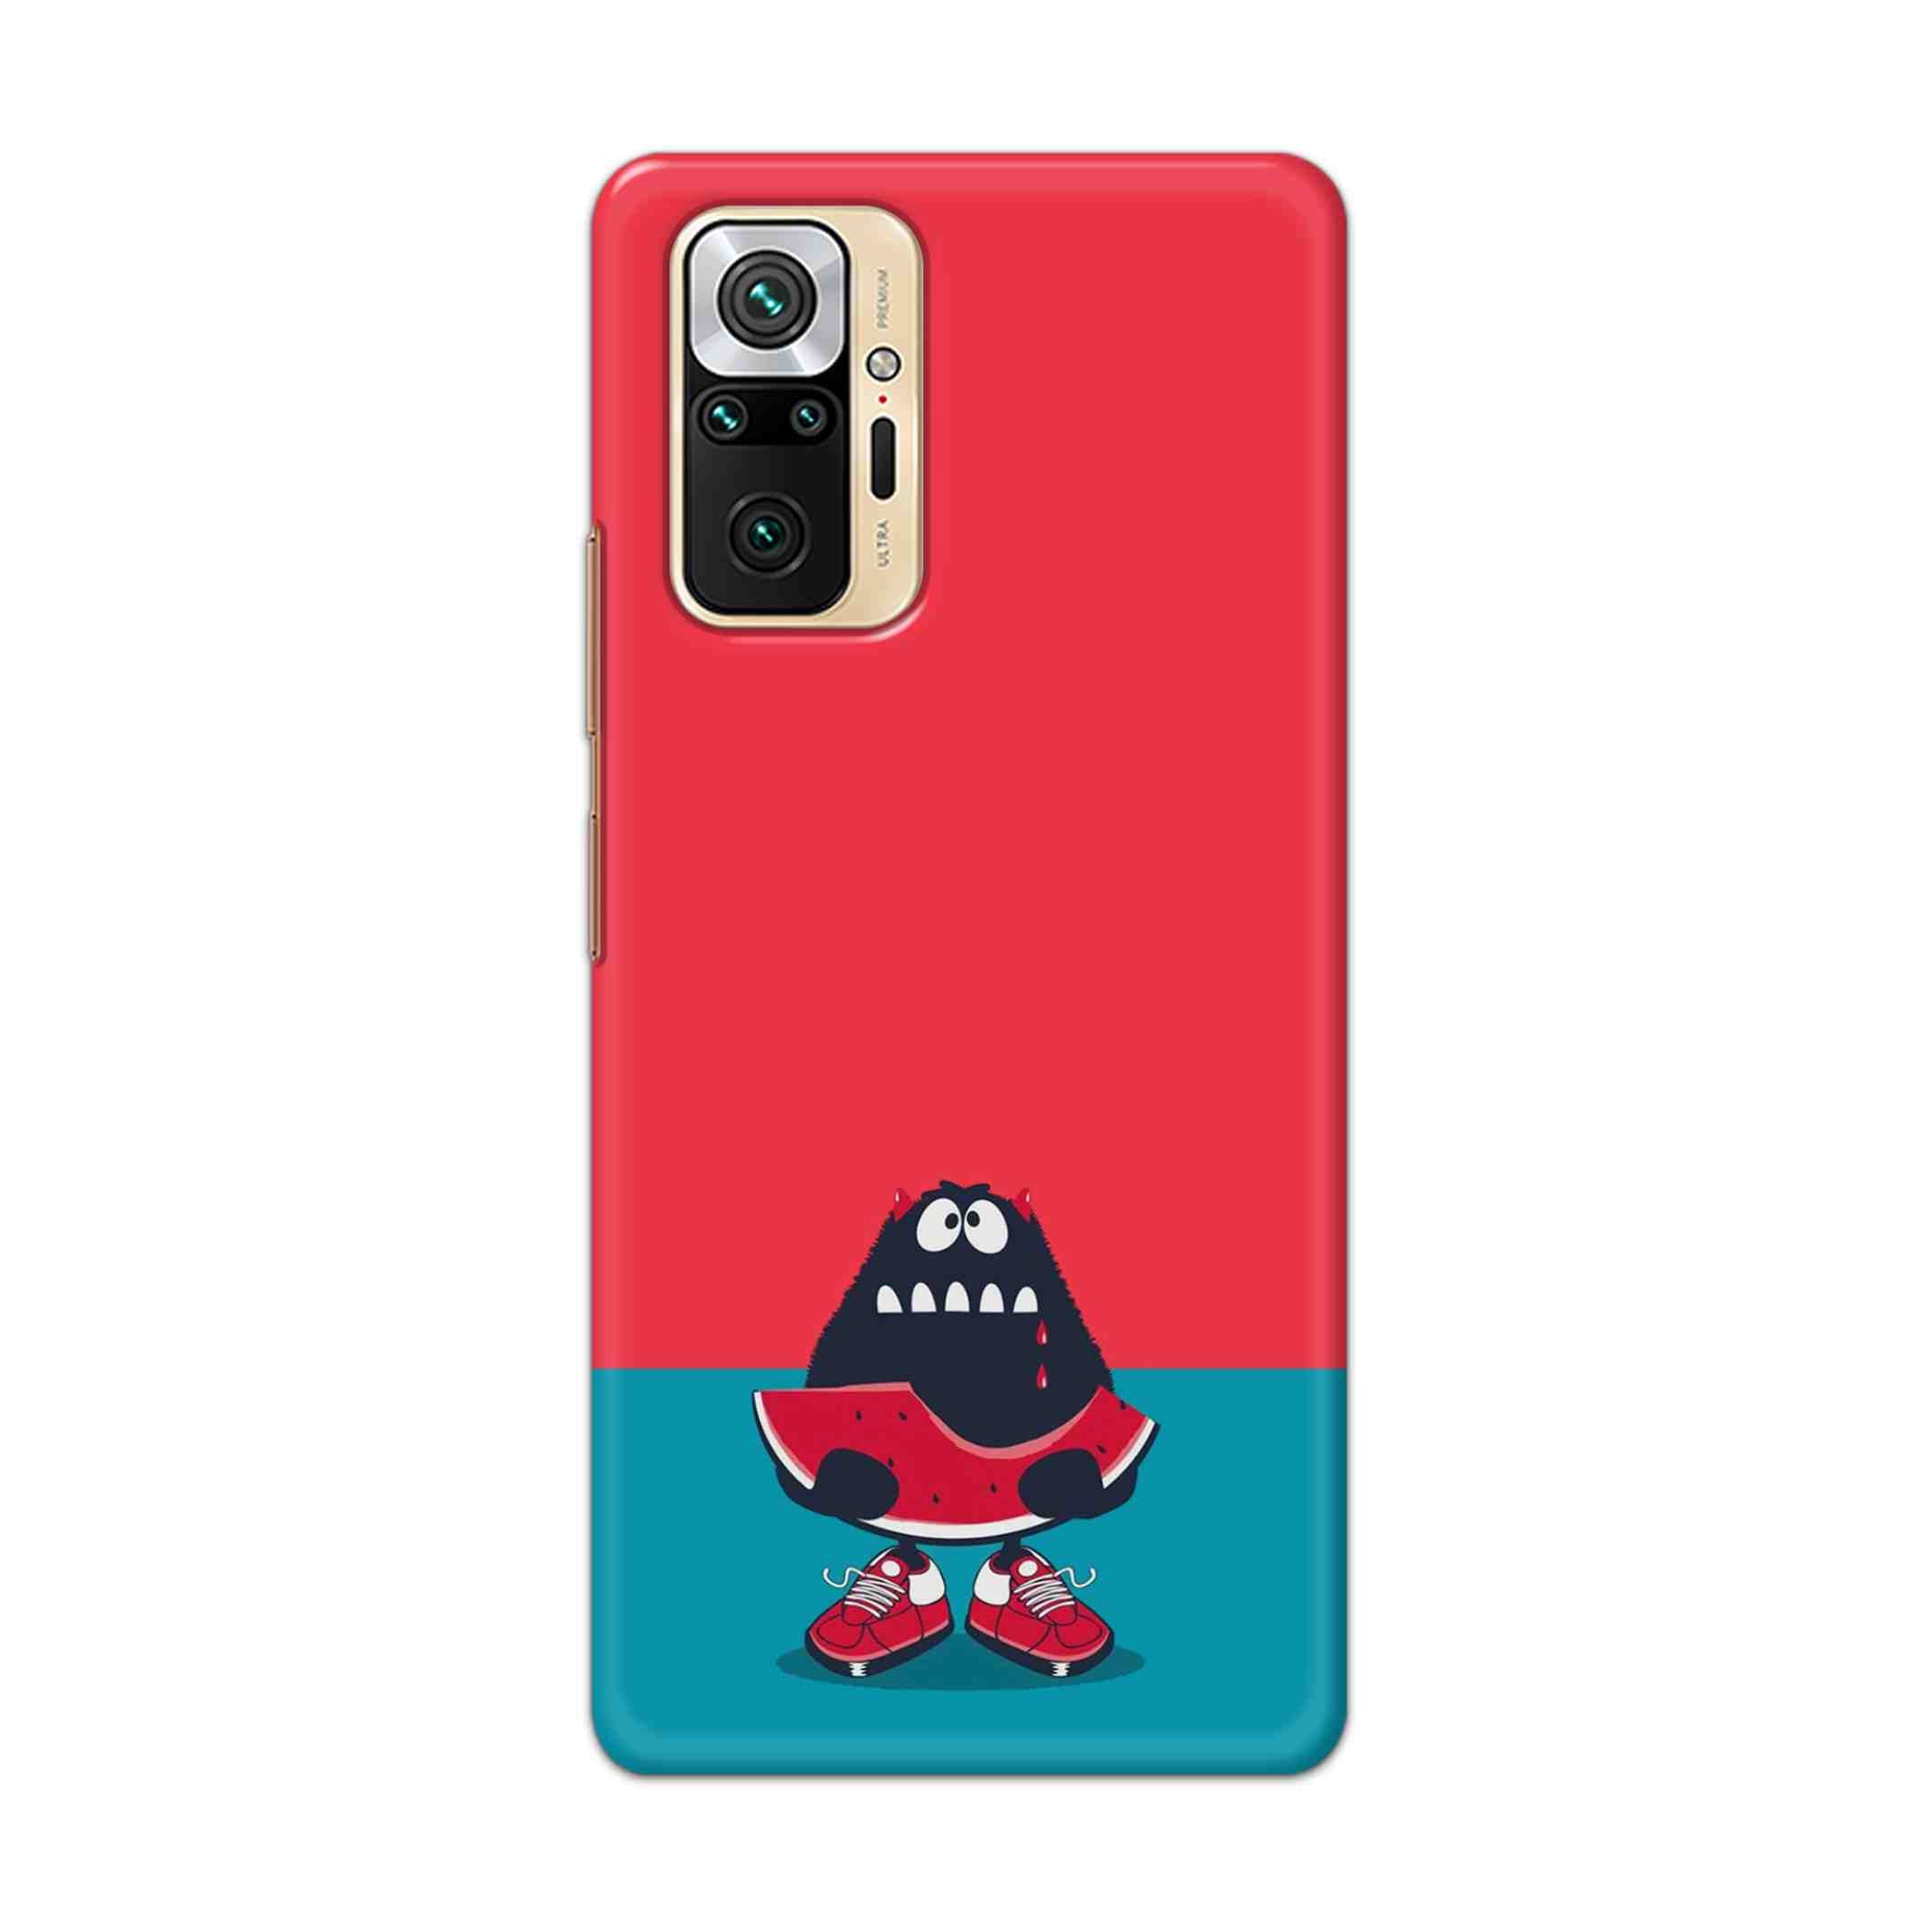 Buy Watermelon Hard Back Mobile Phone Case Cover For Redmi Note 10 Pro Online